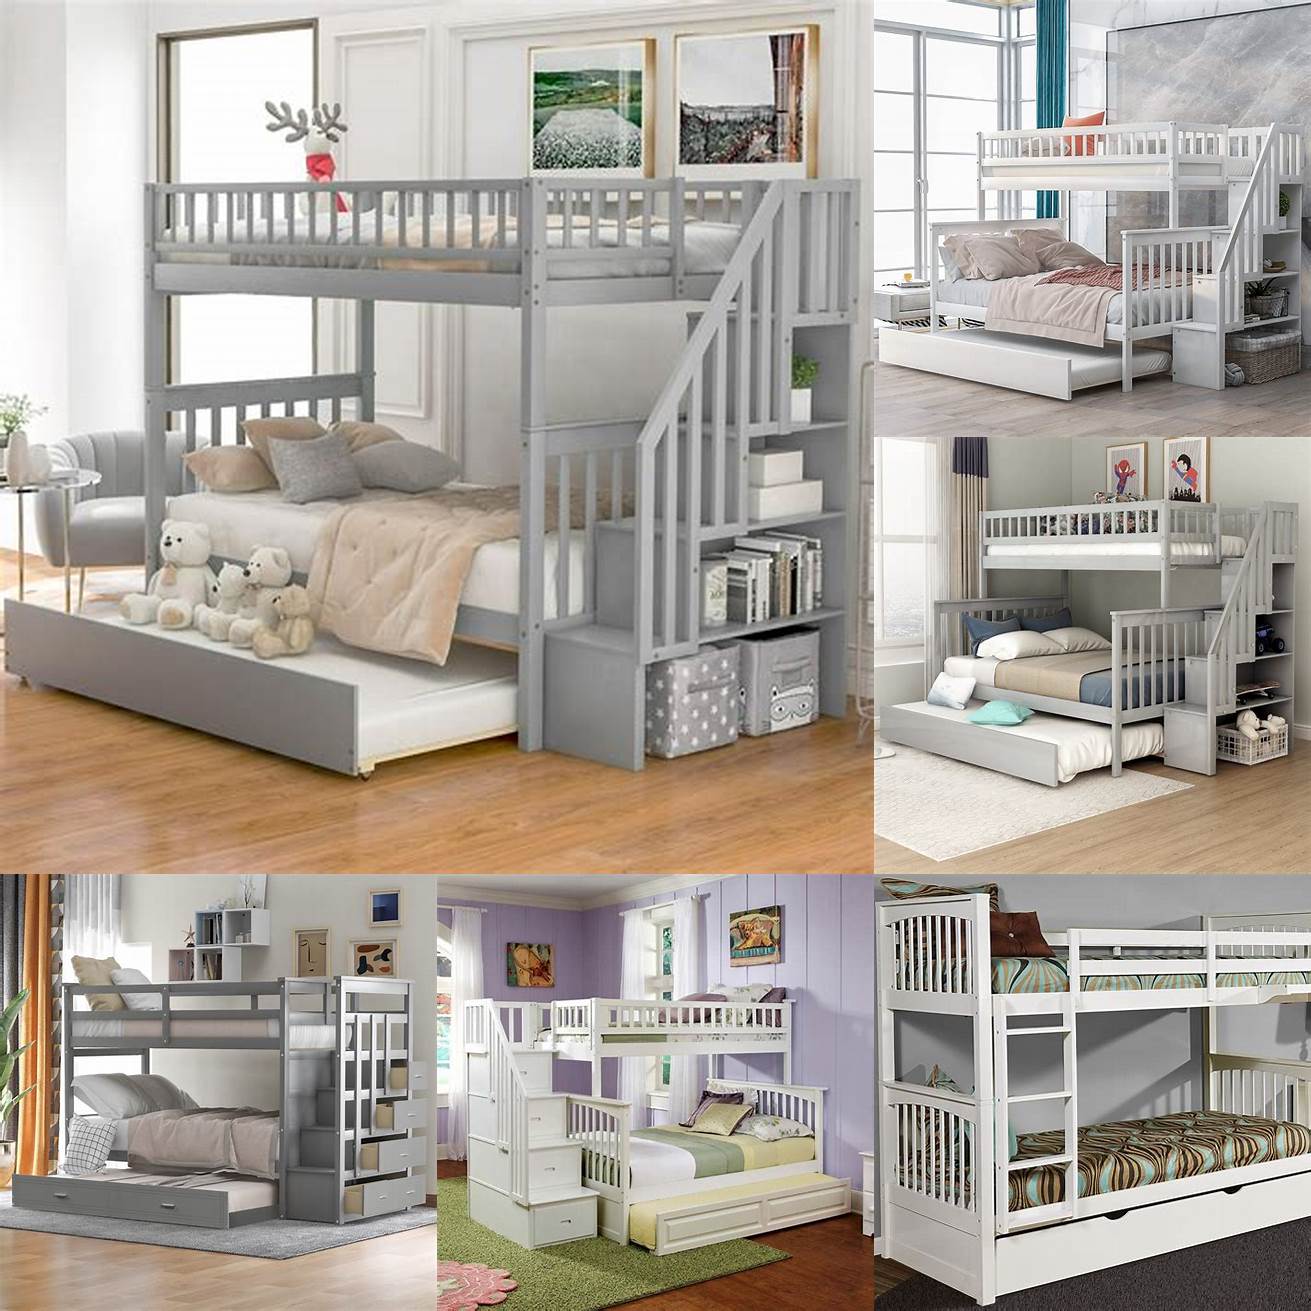 Image of a bunk bed with trundle in a kids room